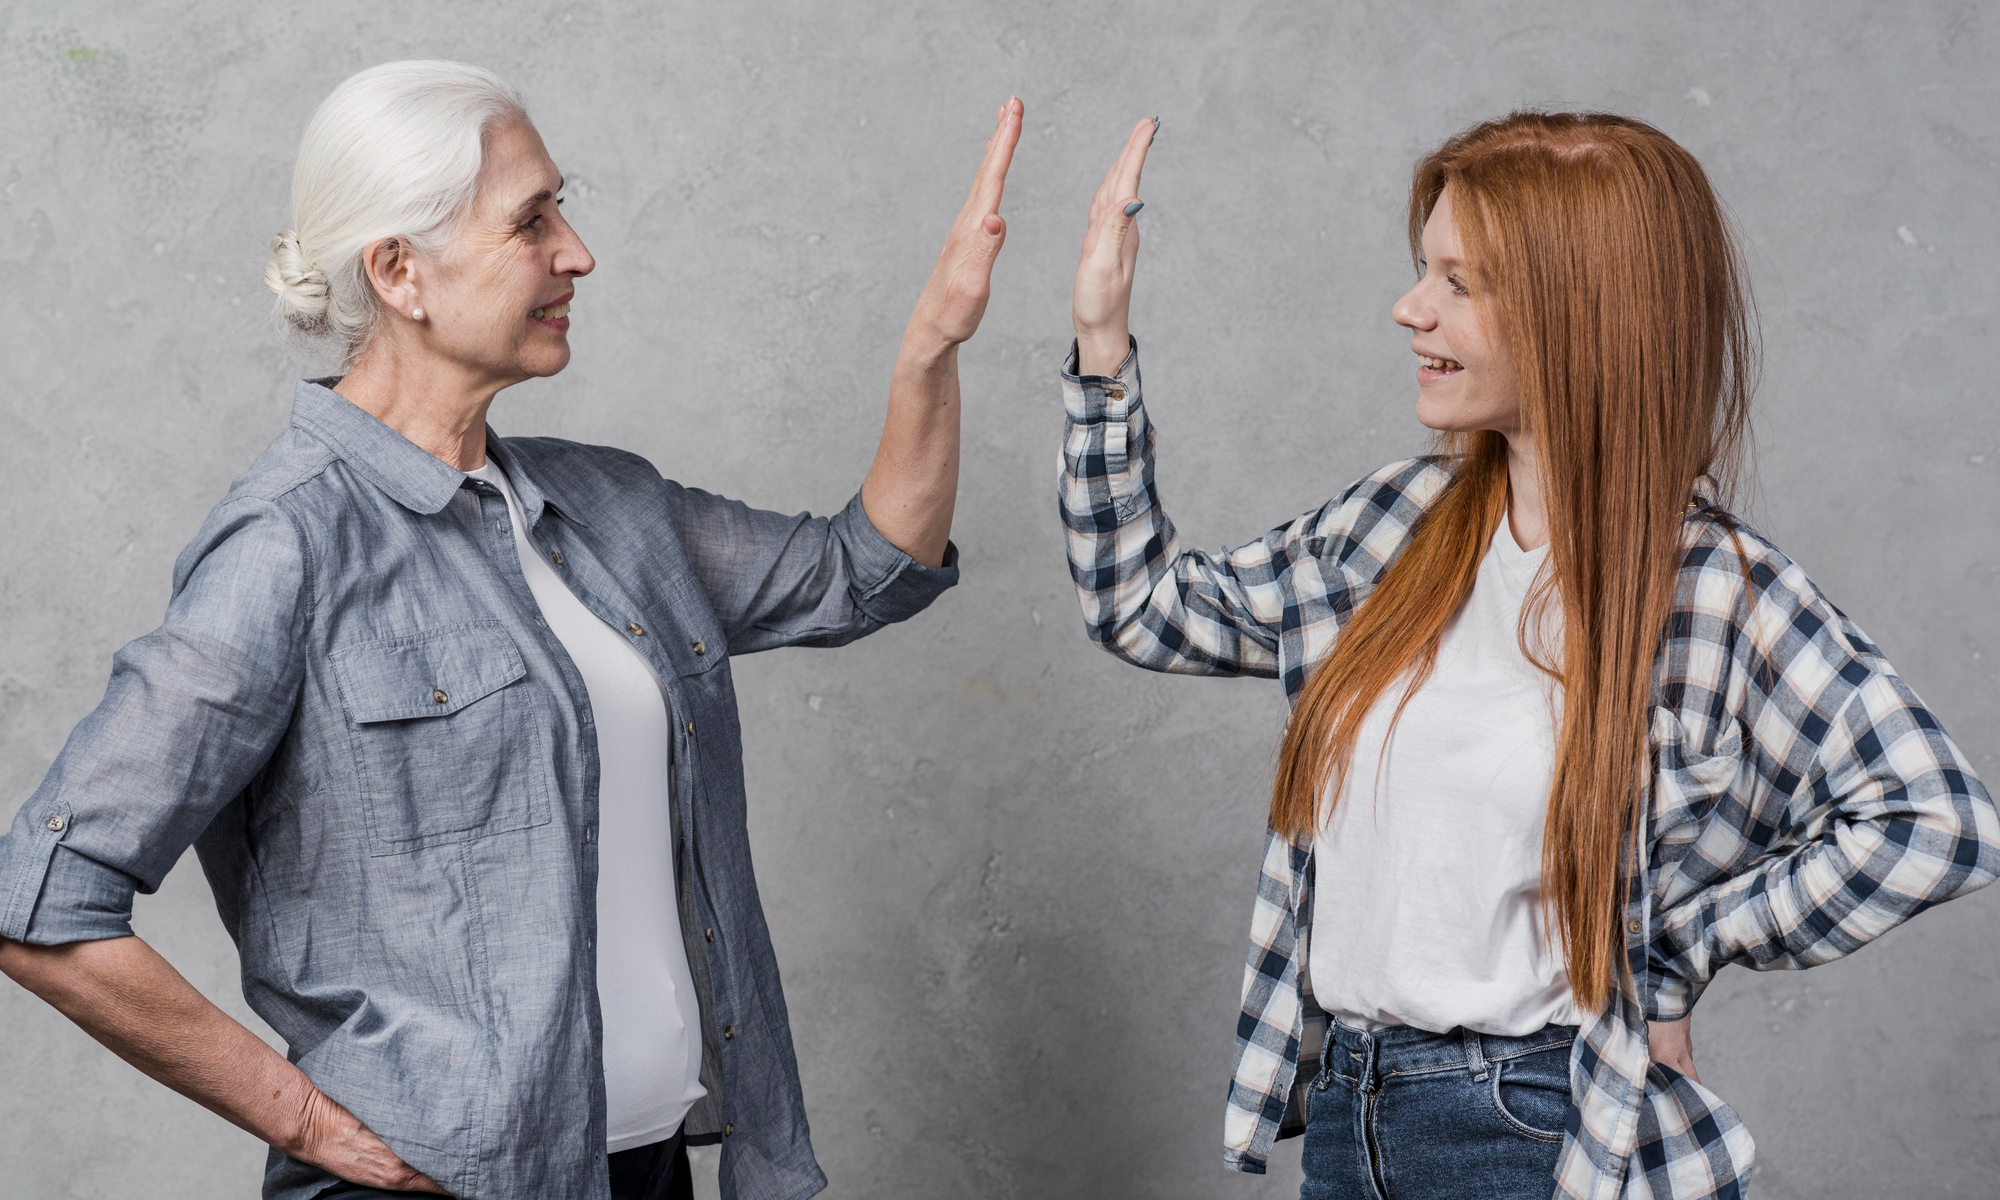 An older woman and a young one sharing a high five | Source: Freepik